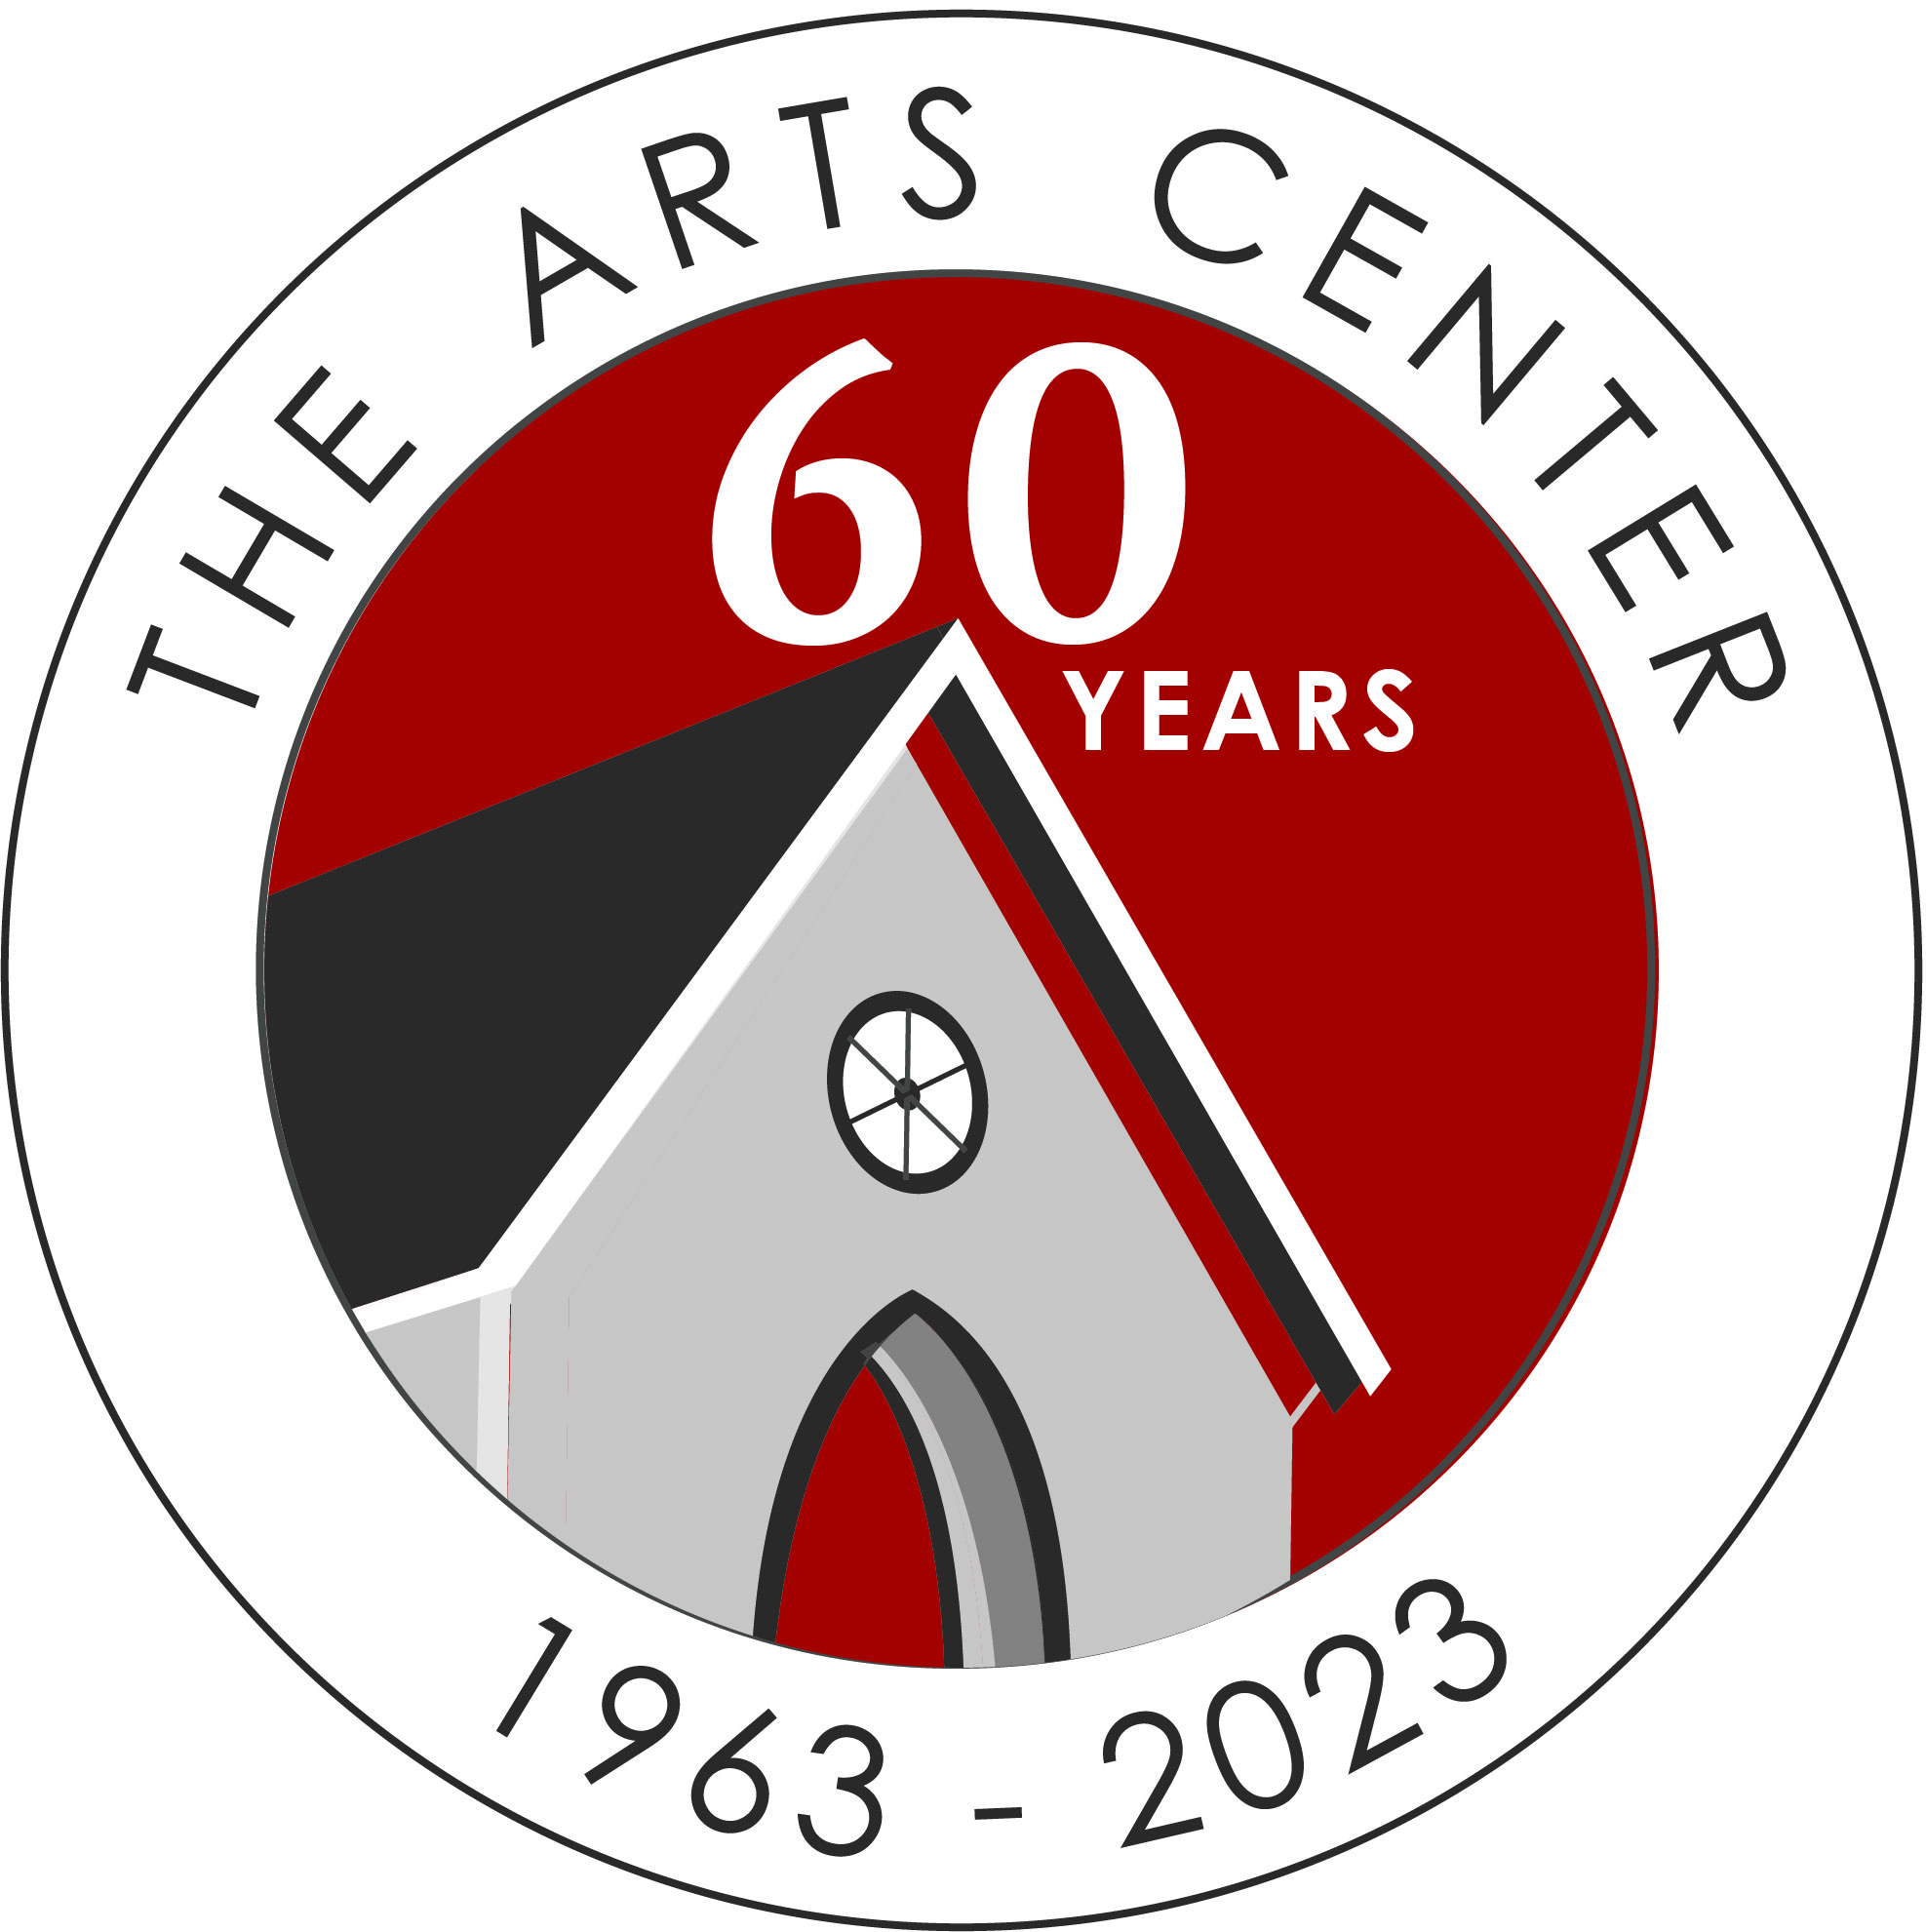 Logo with red circle, silhouette of iconic building and 60 Years superimposed over top